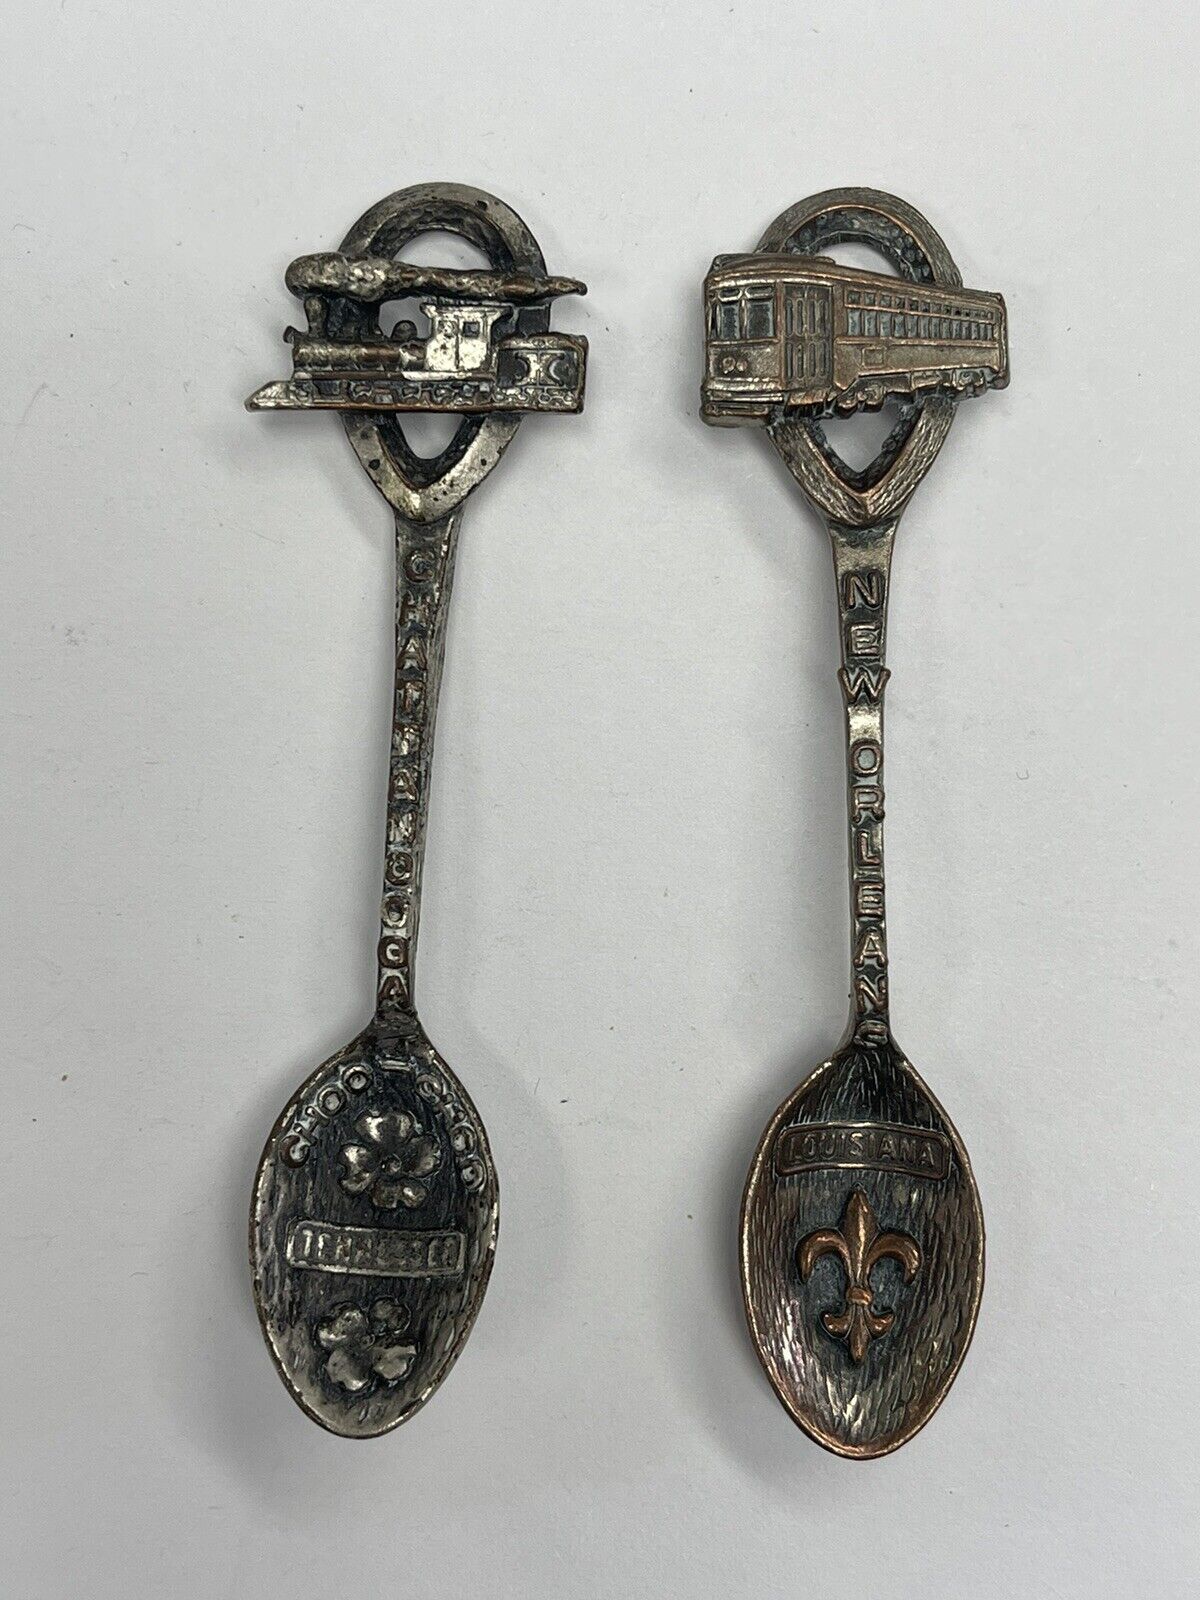 2 Gish Collectible Pewter Spoons. Locomotive /Tennessee and Train/ Louisiana